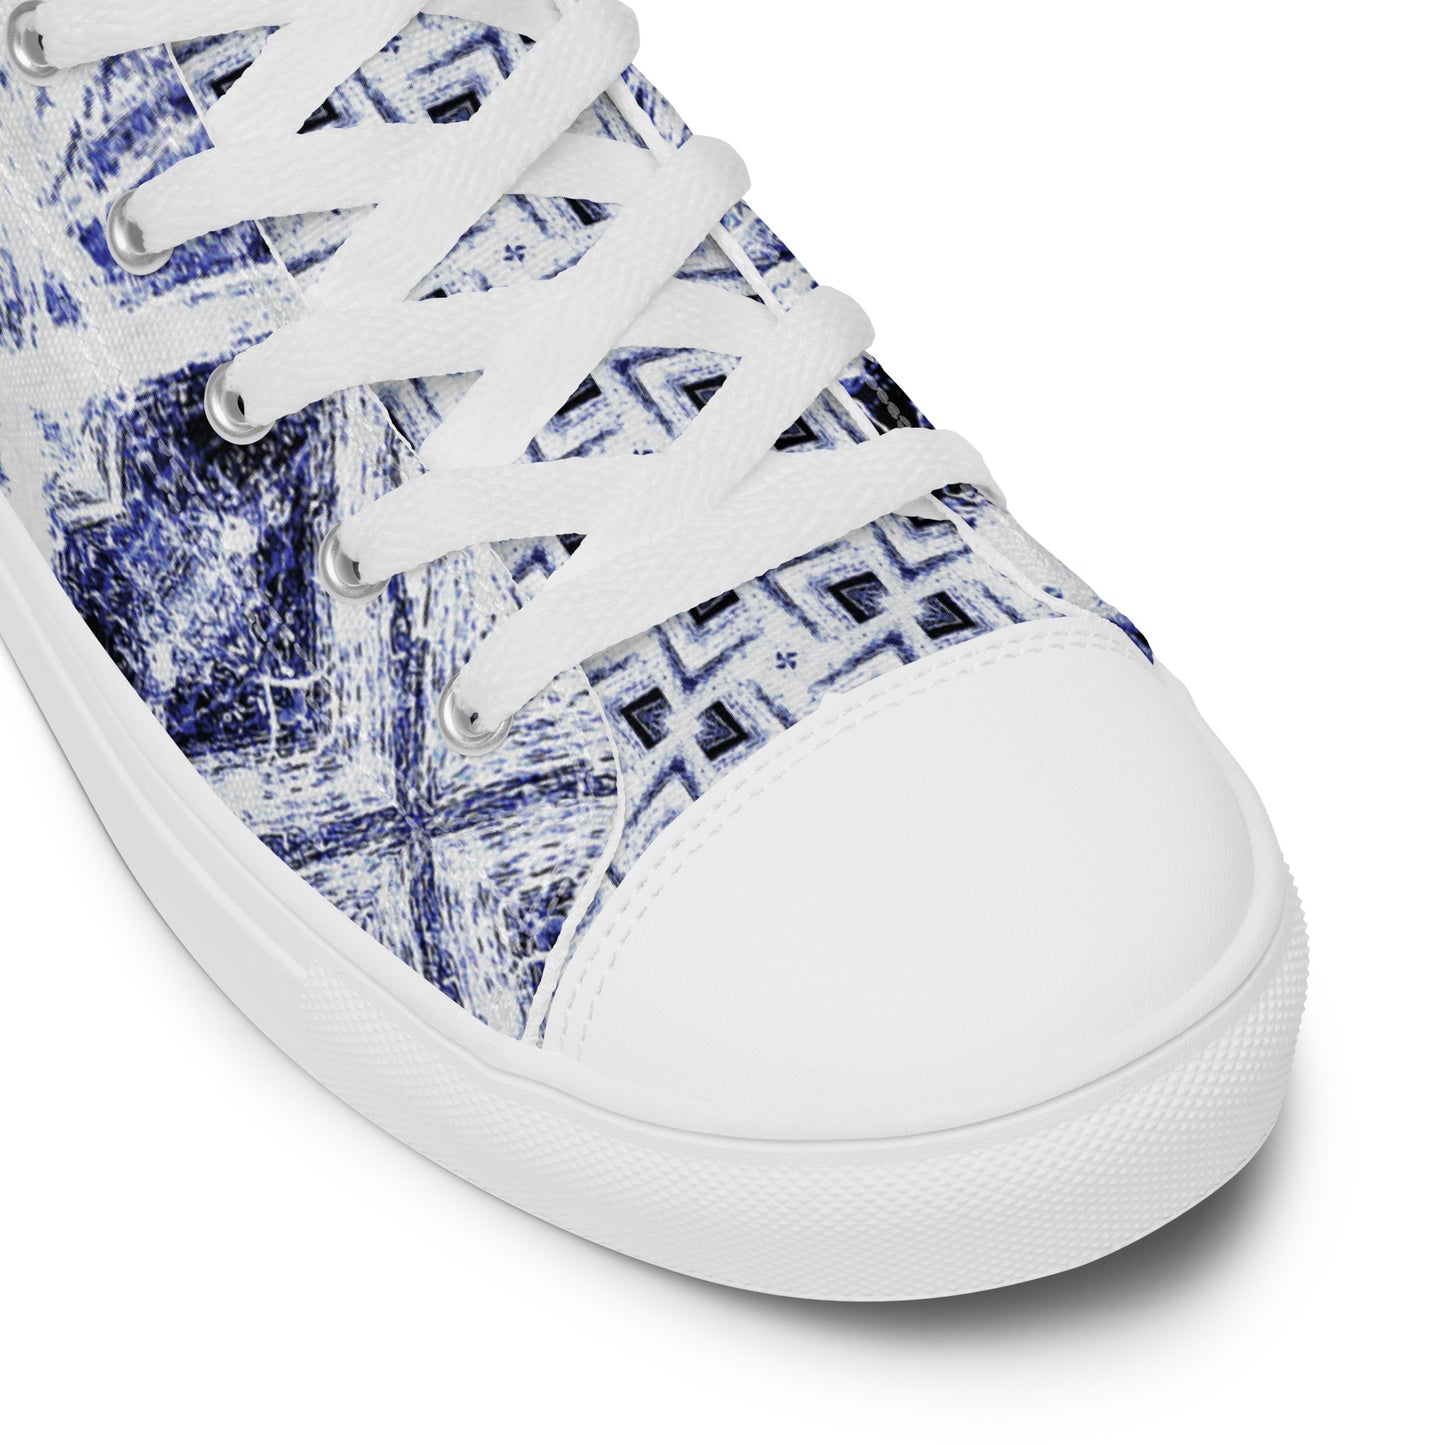 Women’s High Top Canvas Sneakers - Ice Crystals